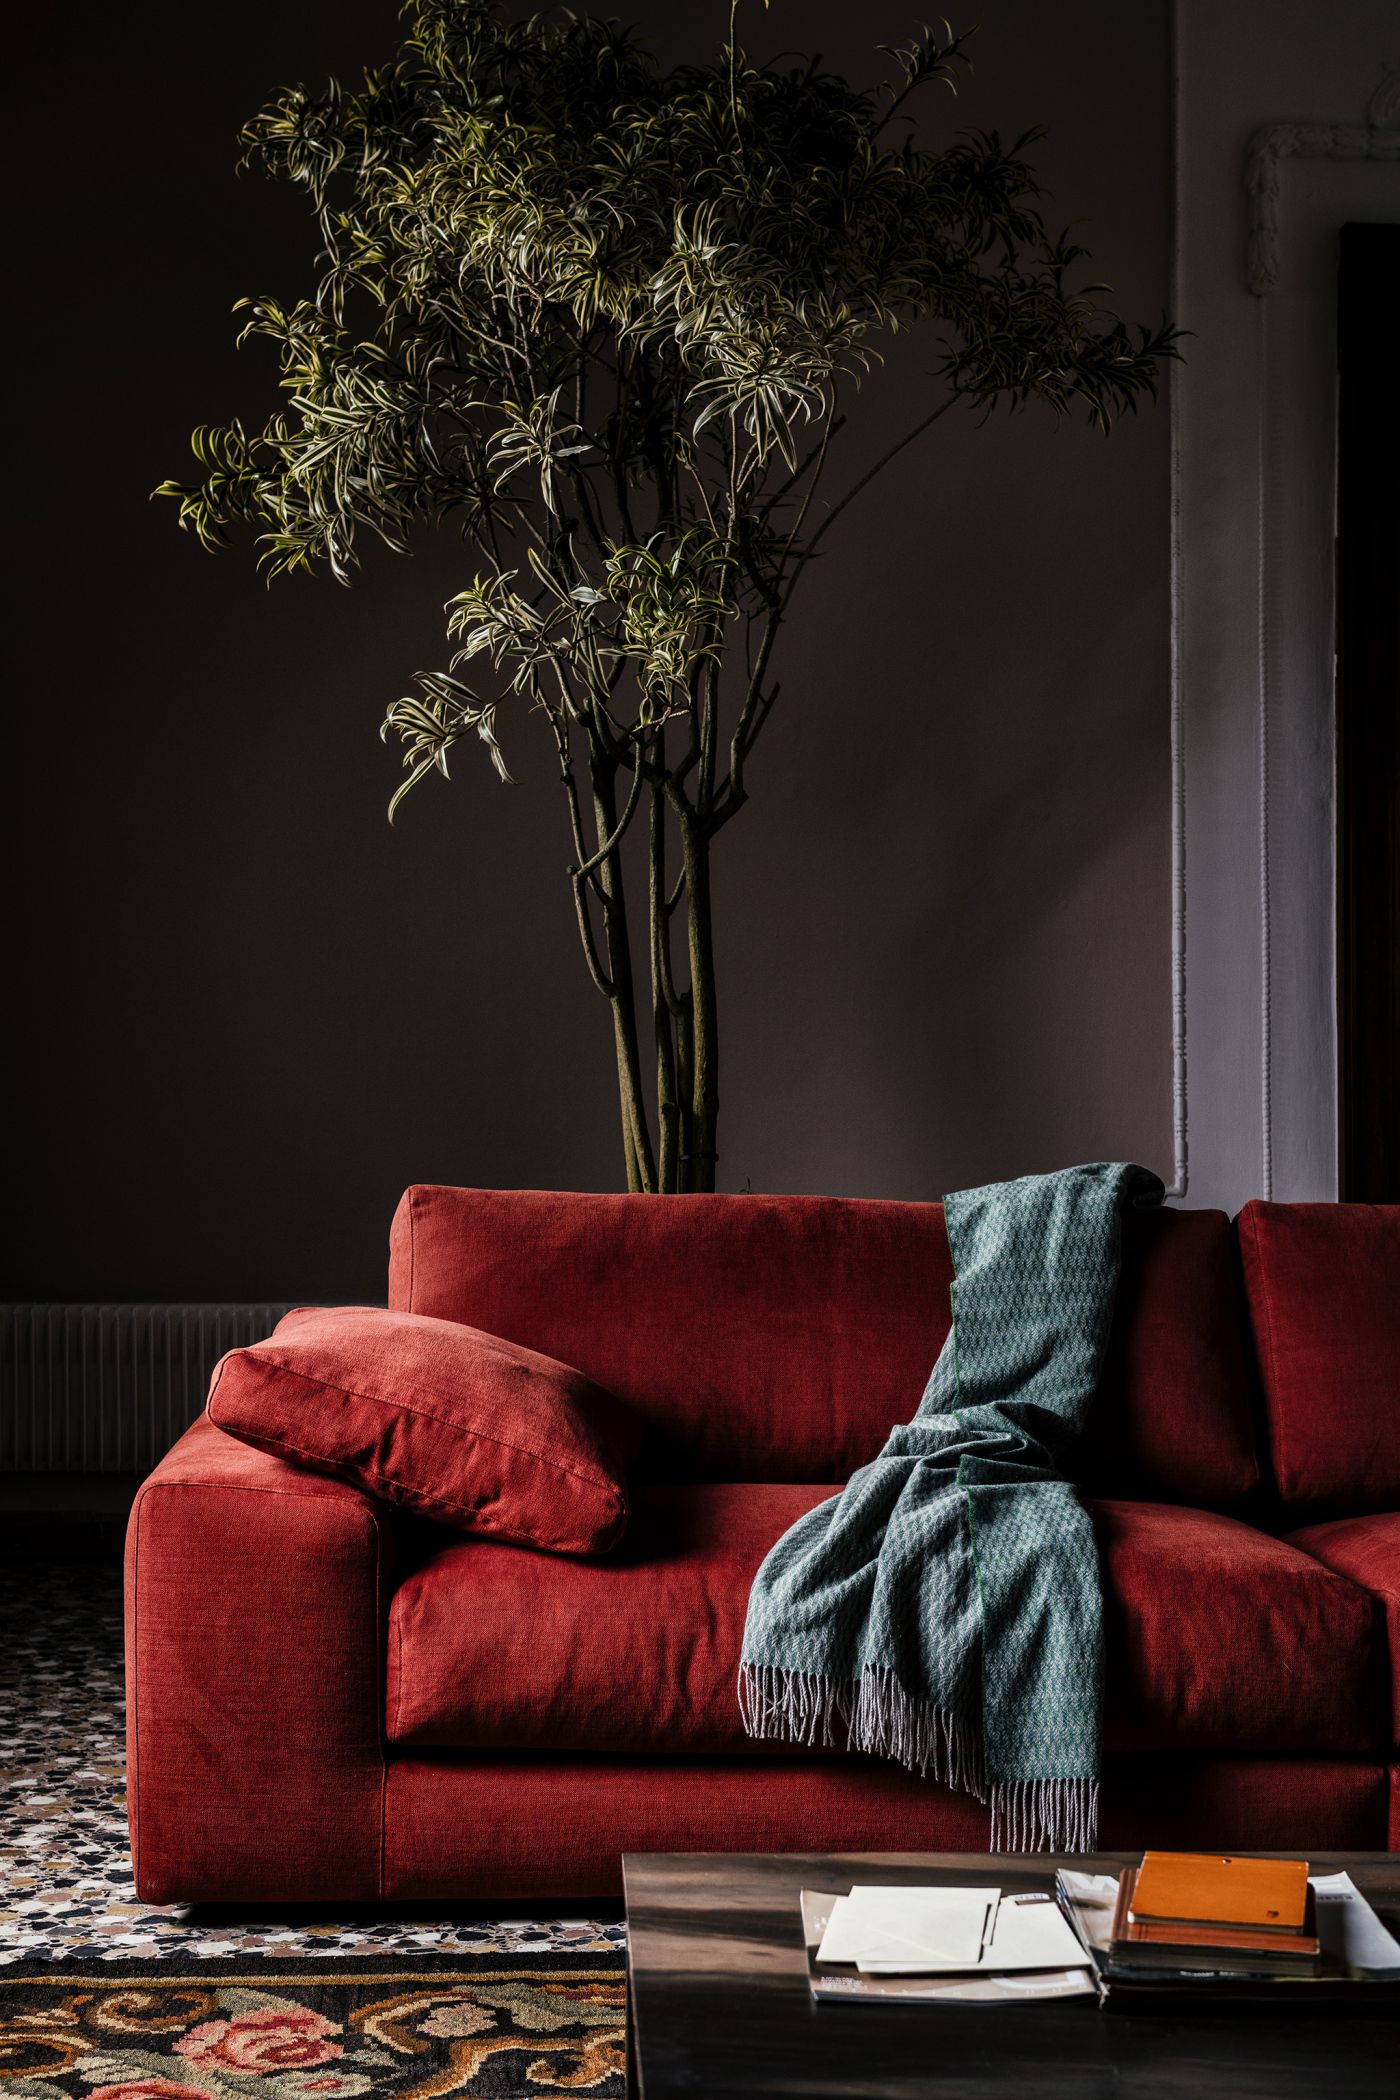 Red Sofa for a Warm and Lovely Setting